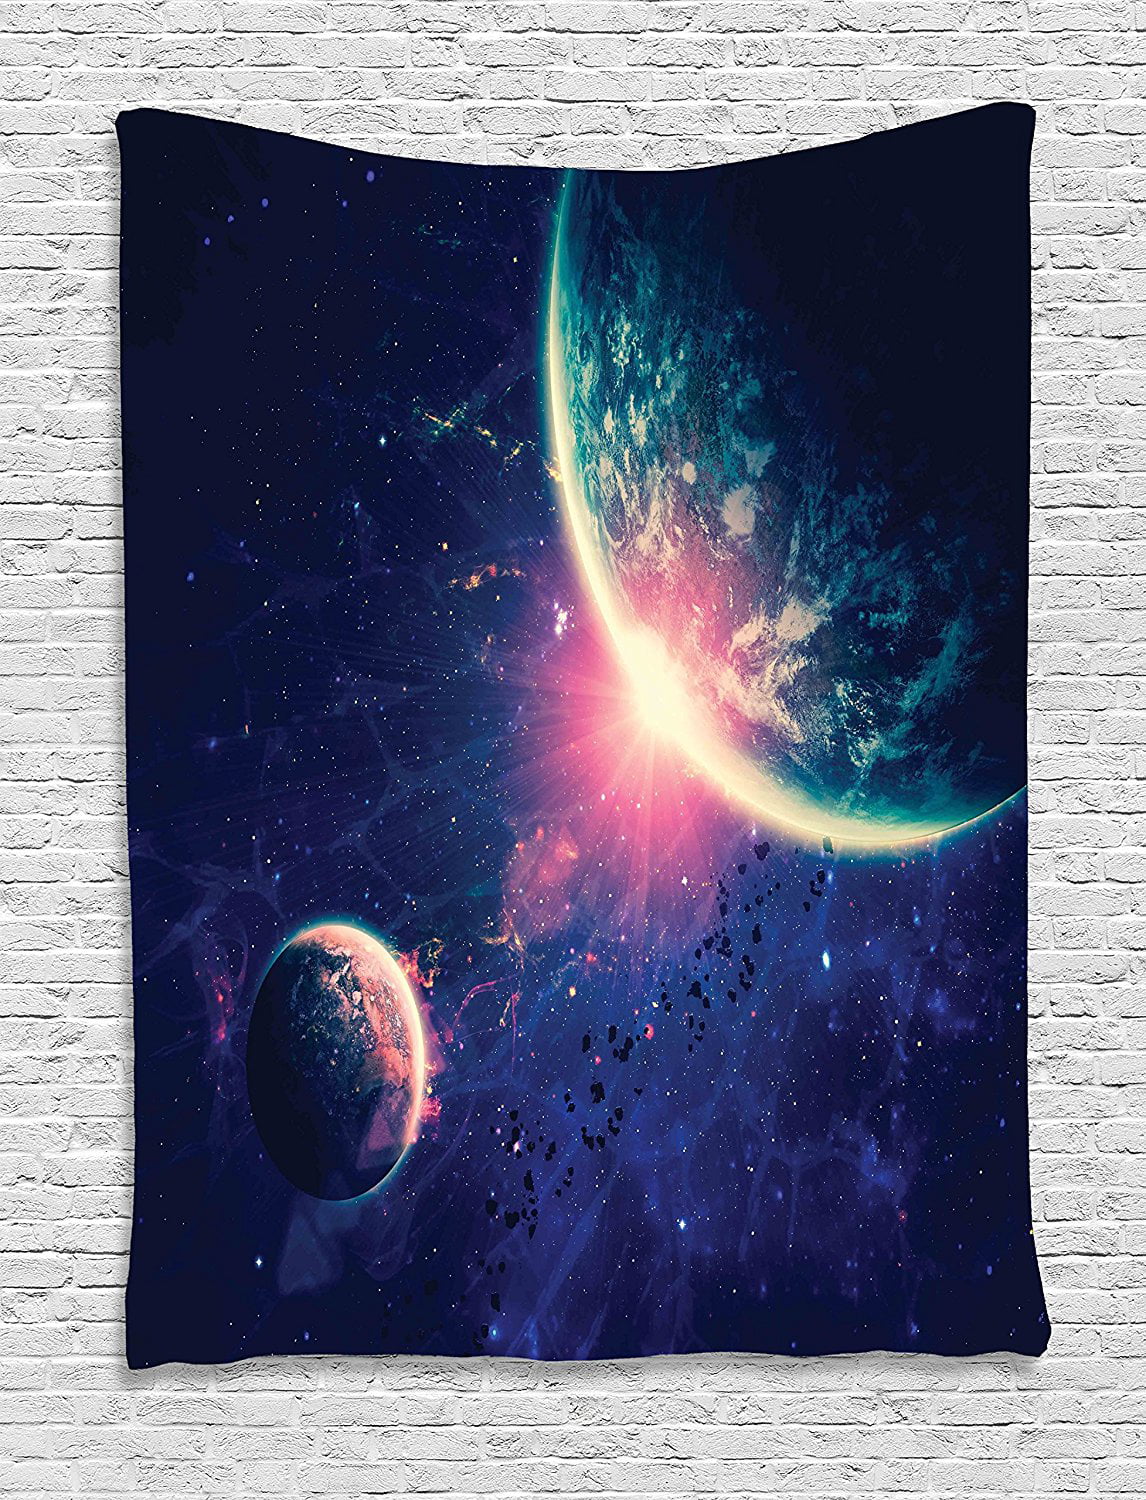 80L X 60W Inches Wall Hanging for Bedroom Living Room Dorm Navy and Purple Space Decor Tapestry Large Size Galaxy Stars in Space Celestial Astronomic Planets in the Universe Milky Way Print